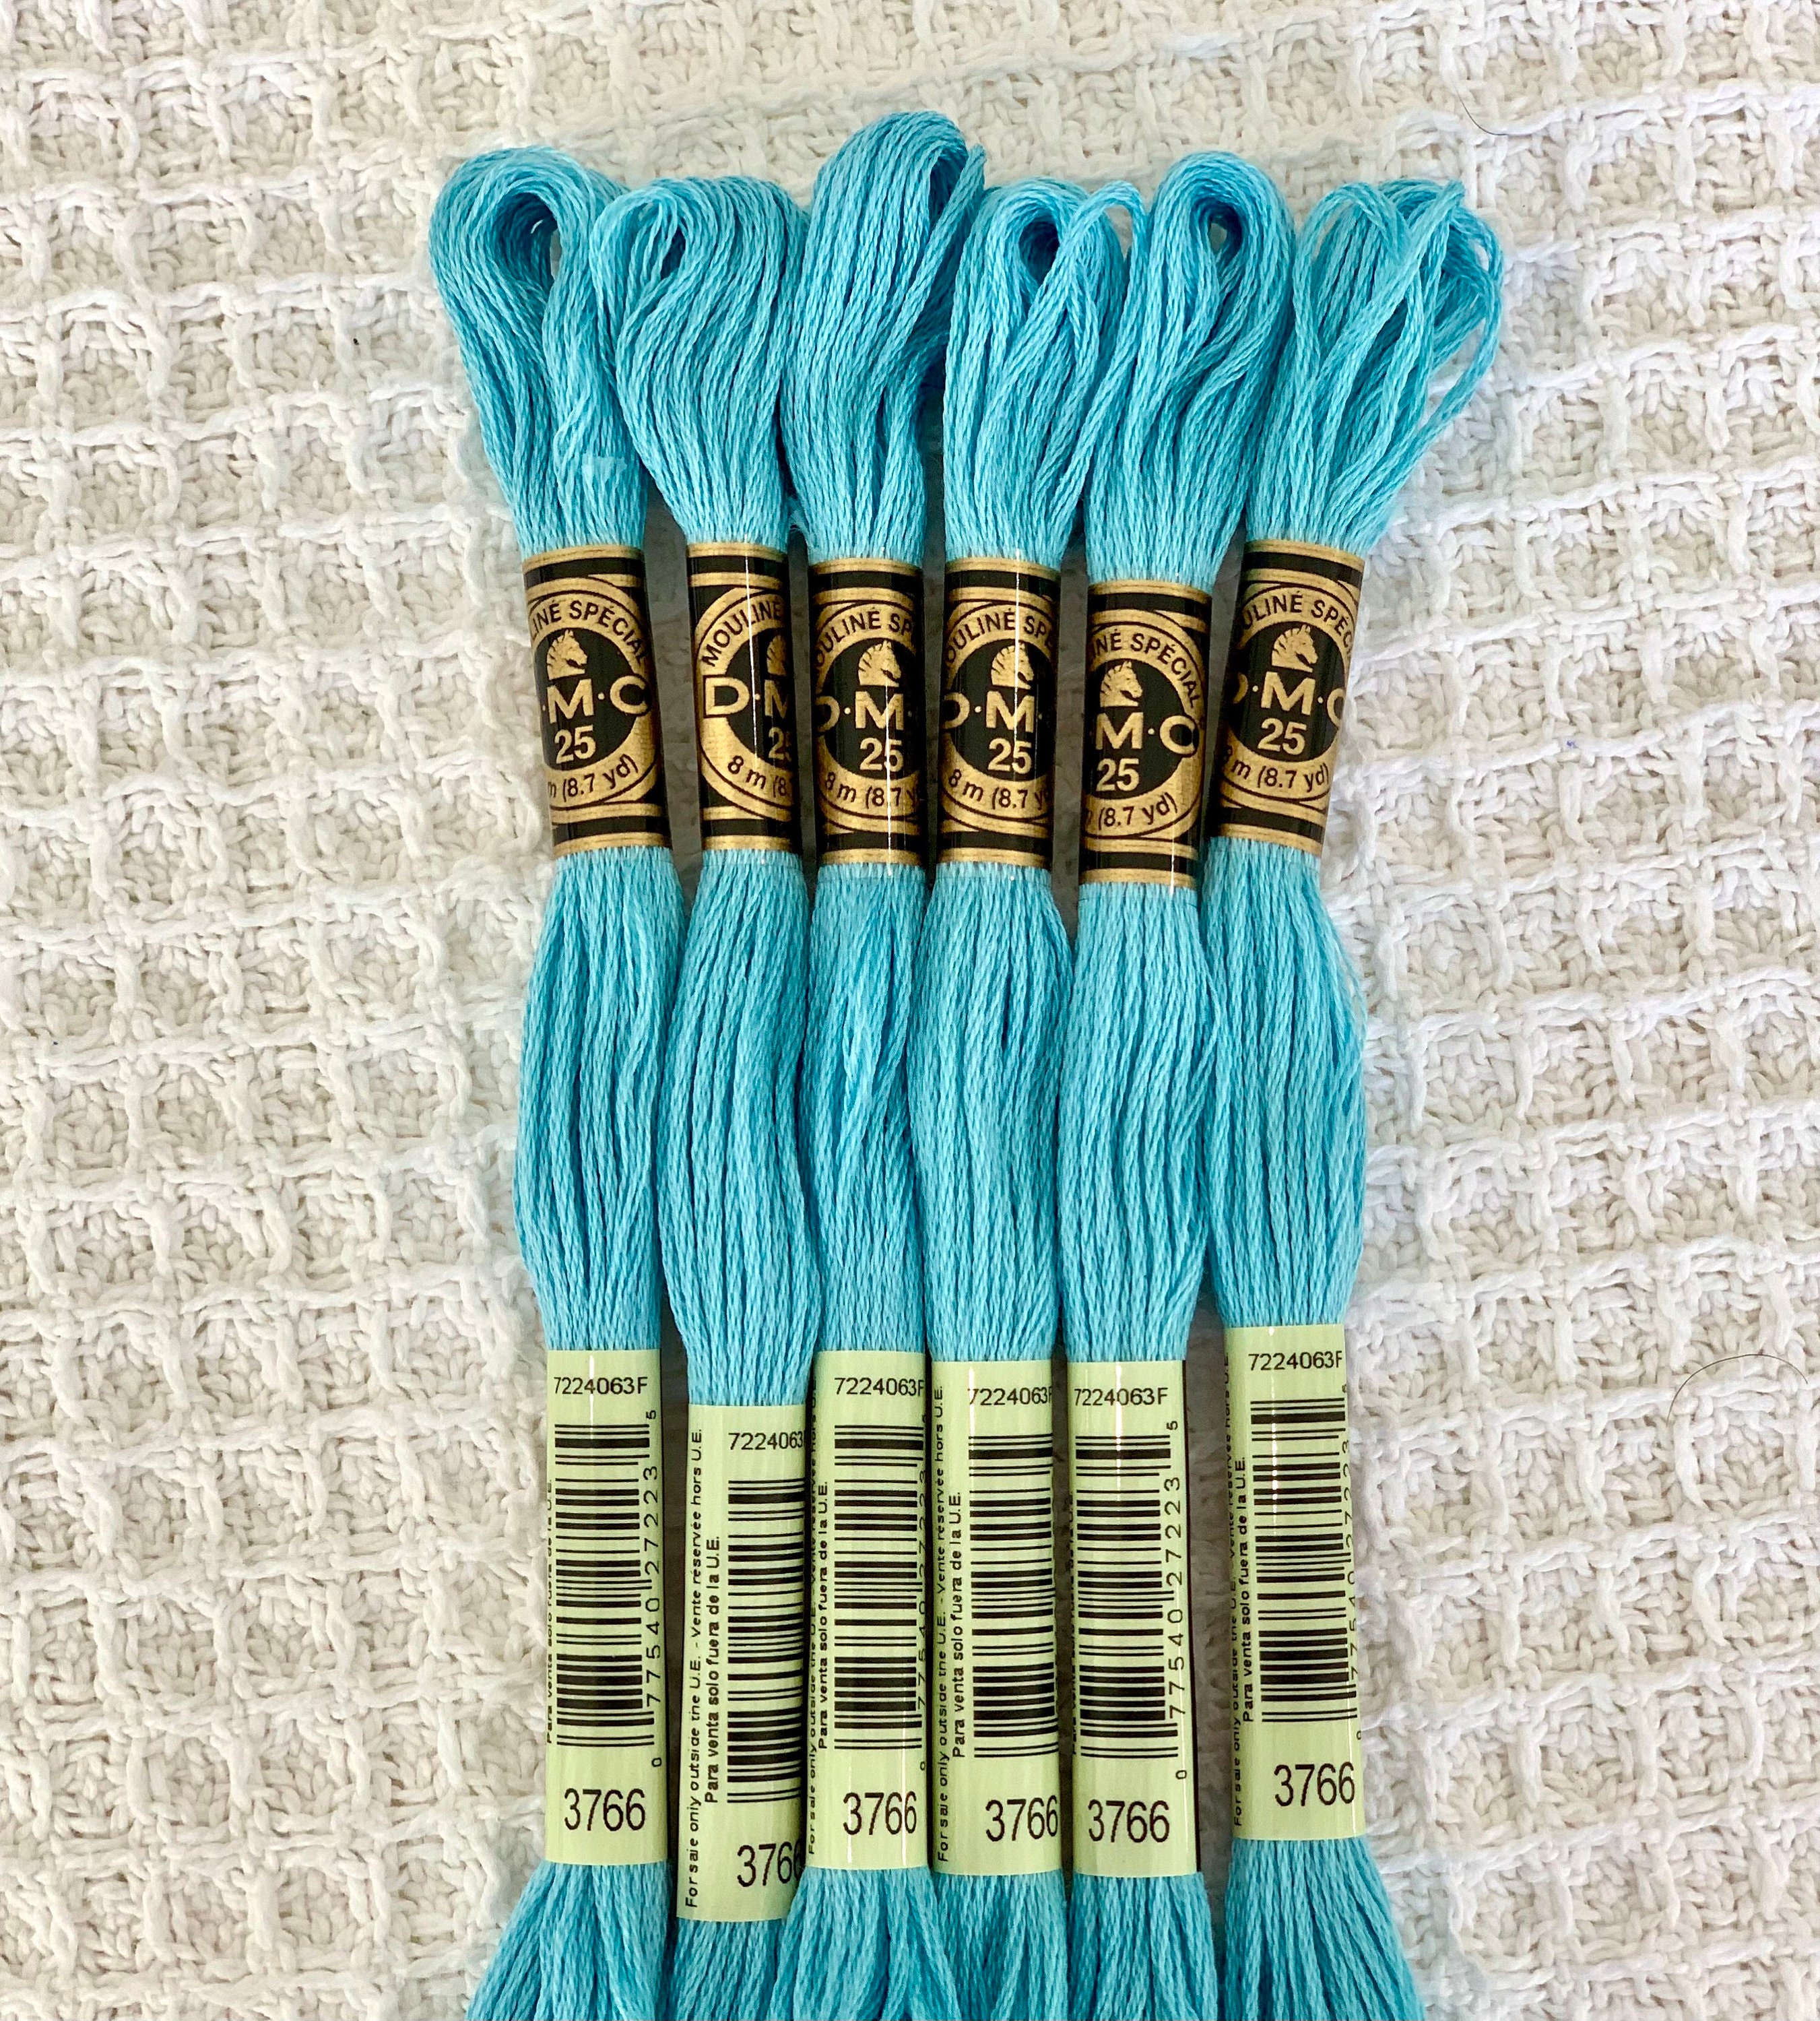 995 TURQUOISE Ocean Blue DMC Embroidery Thread Floss Lot of 5 Skeins NEW